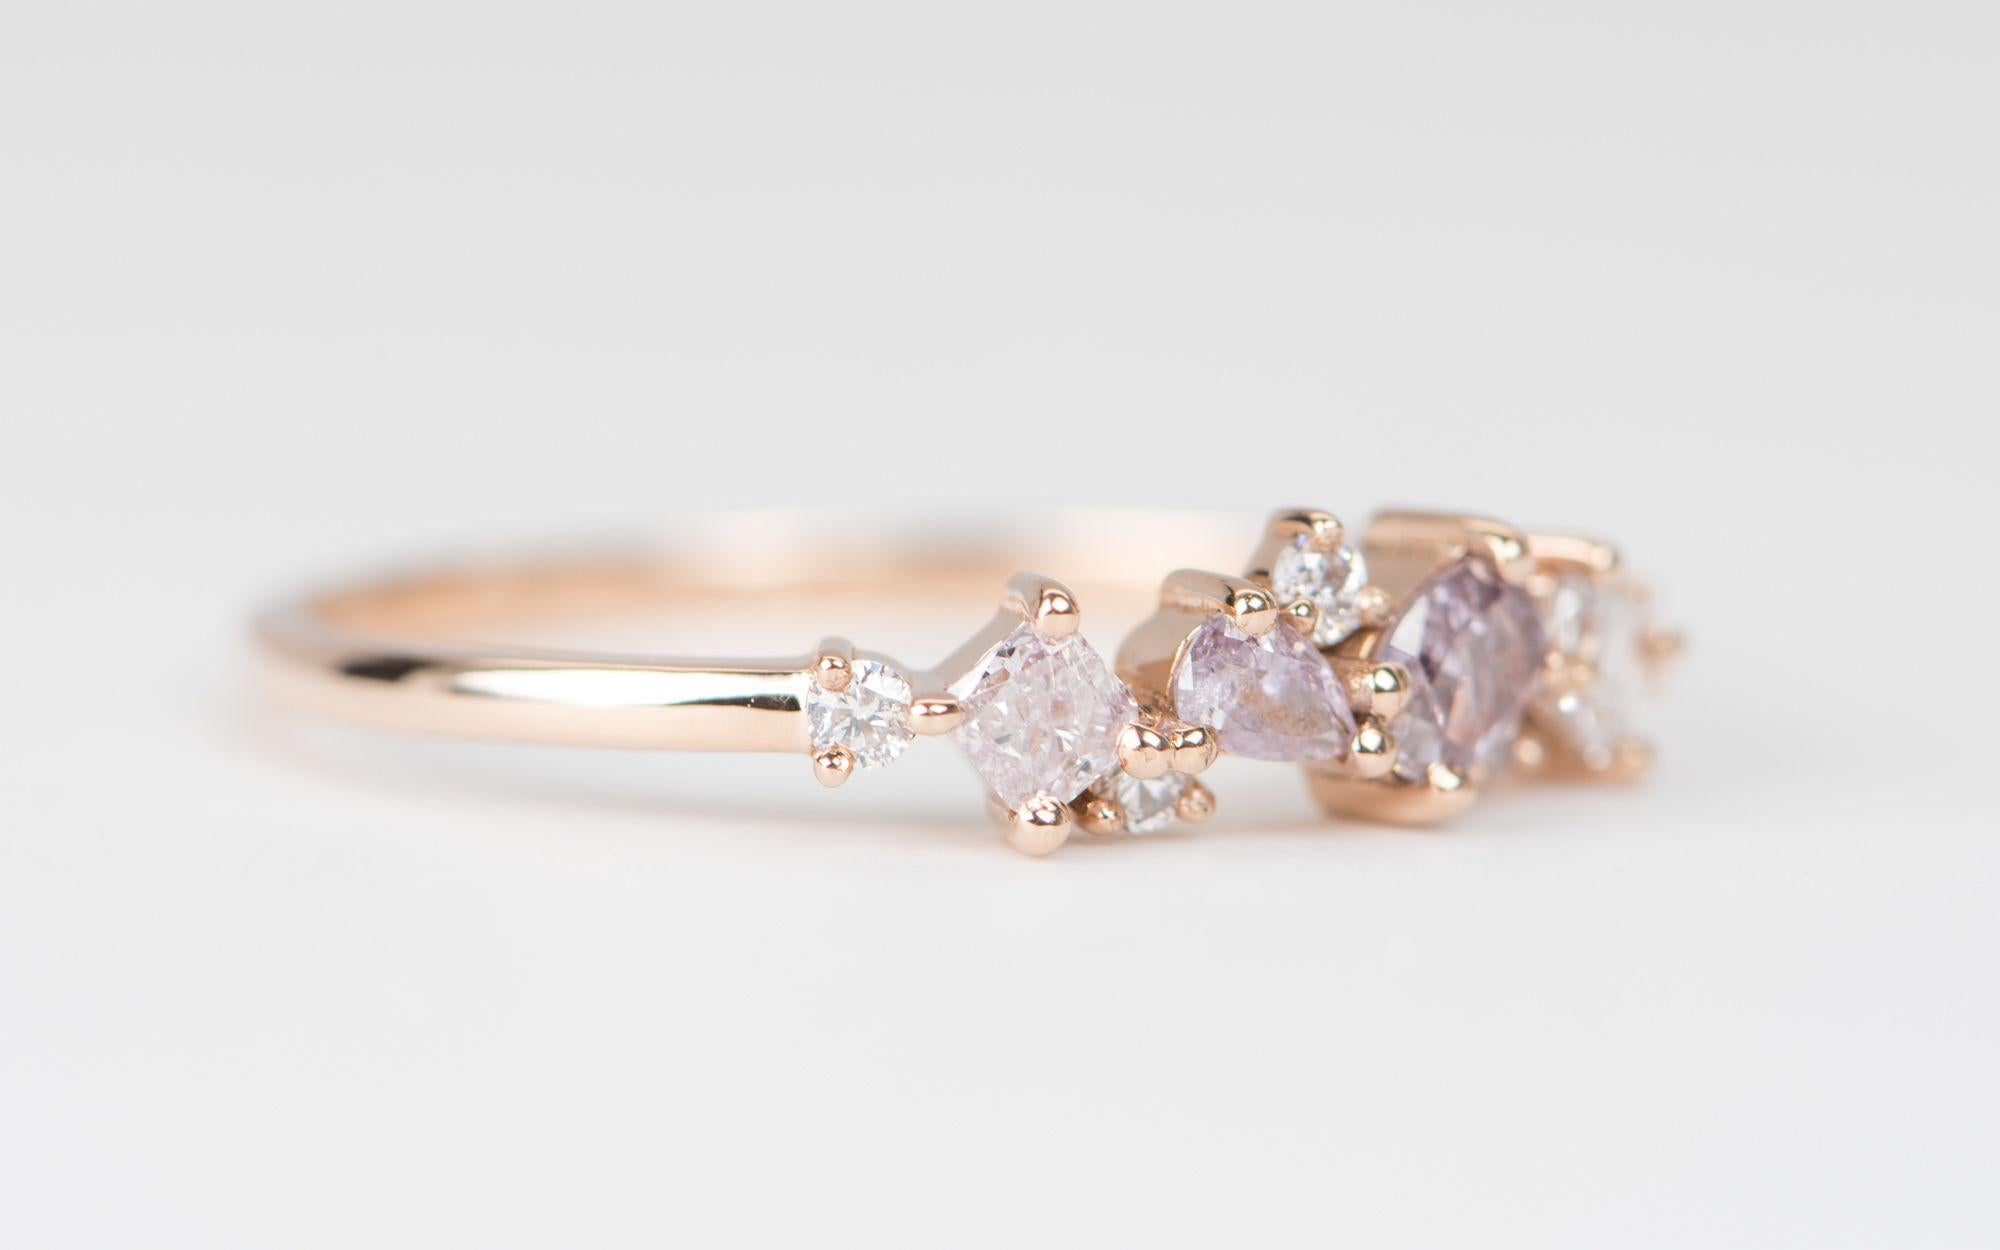 ♥ Natural Pink Diamond Cluster 14K Rose Gold Wedding Band
♥ Solid 14k rose gold ring set with beautiful mix-shaped pink diamonds
♥ Gorgeous pink color!
♥ The item measures 15.6 mm in length, 4.8 mm in width, and stands 3.4 mm from the finger

♥ US